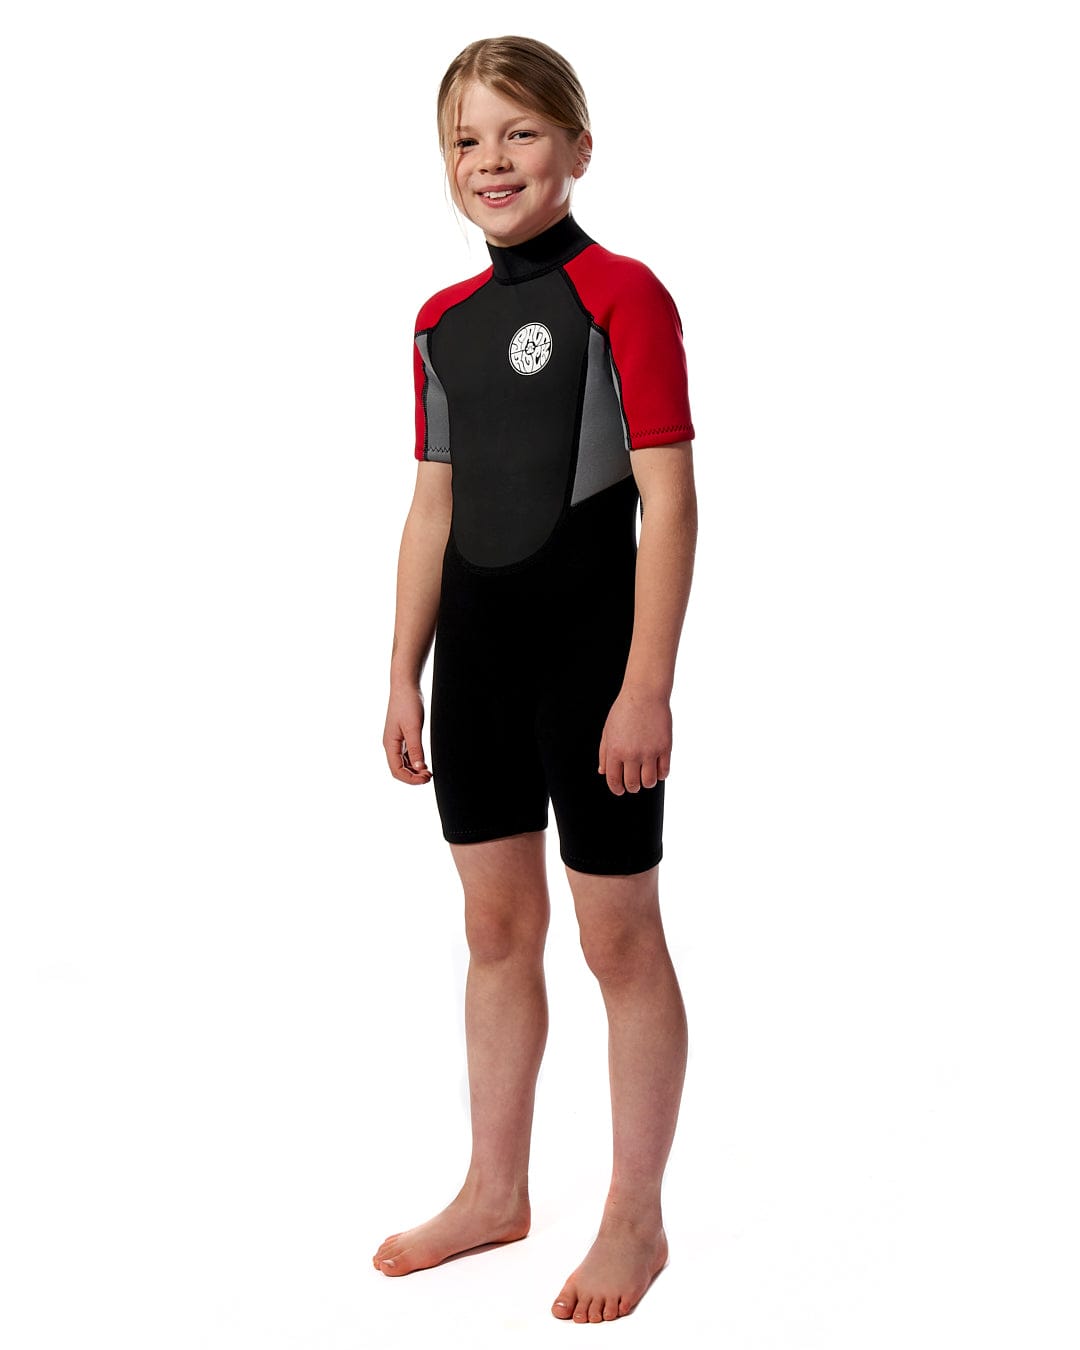 A young girl in a Saltrock Core - 3/2 Shortie Wetsuit - Red standing in front of a white background.